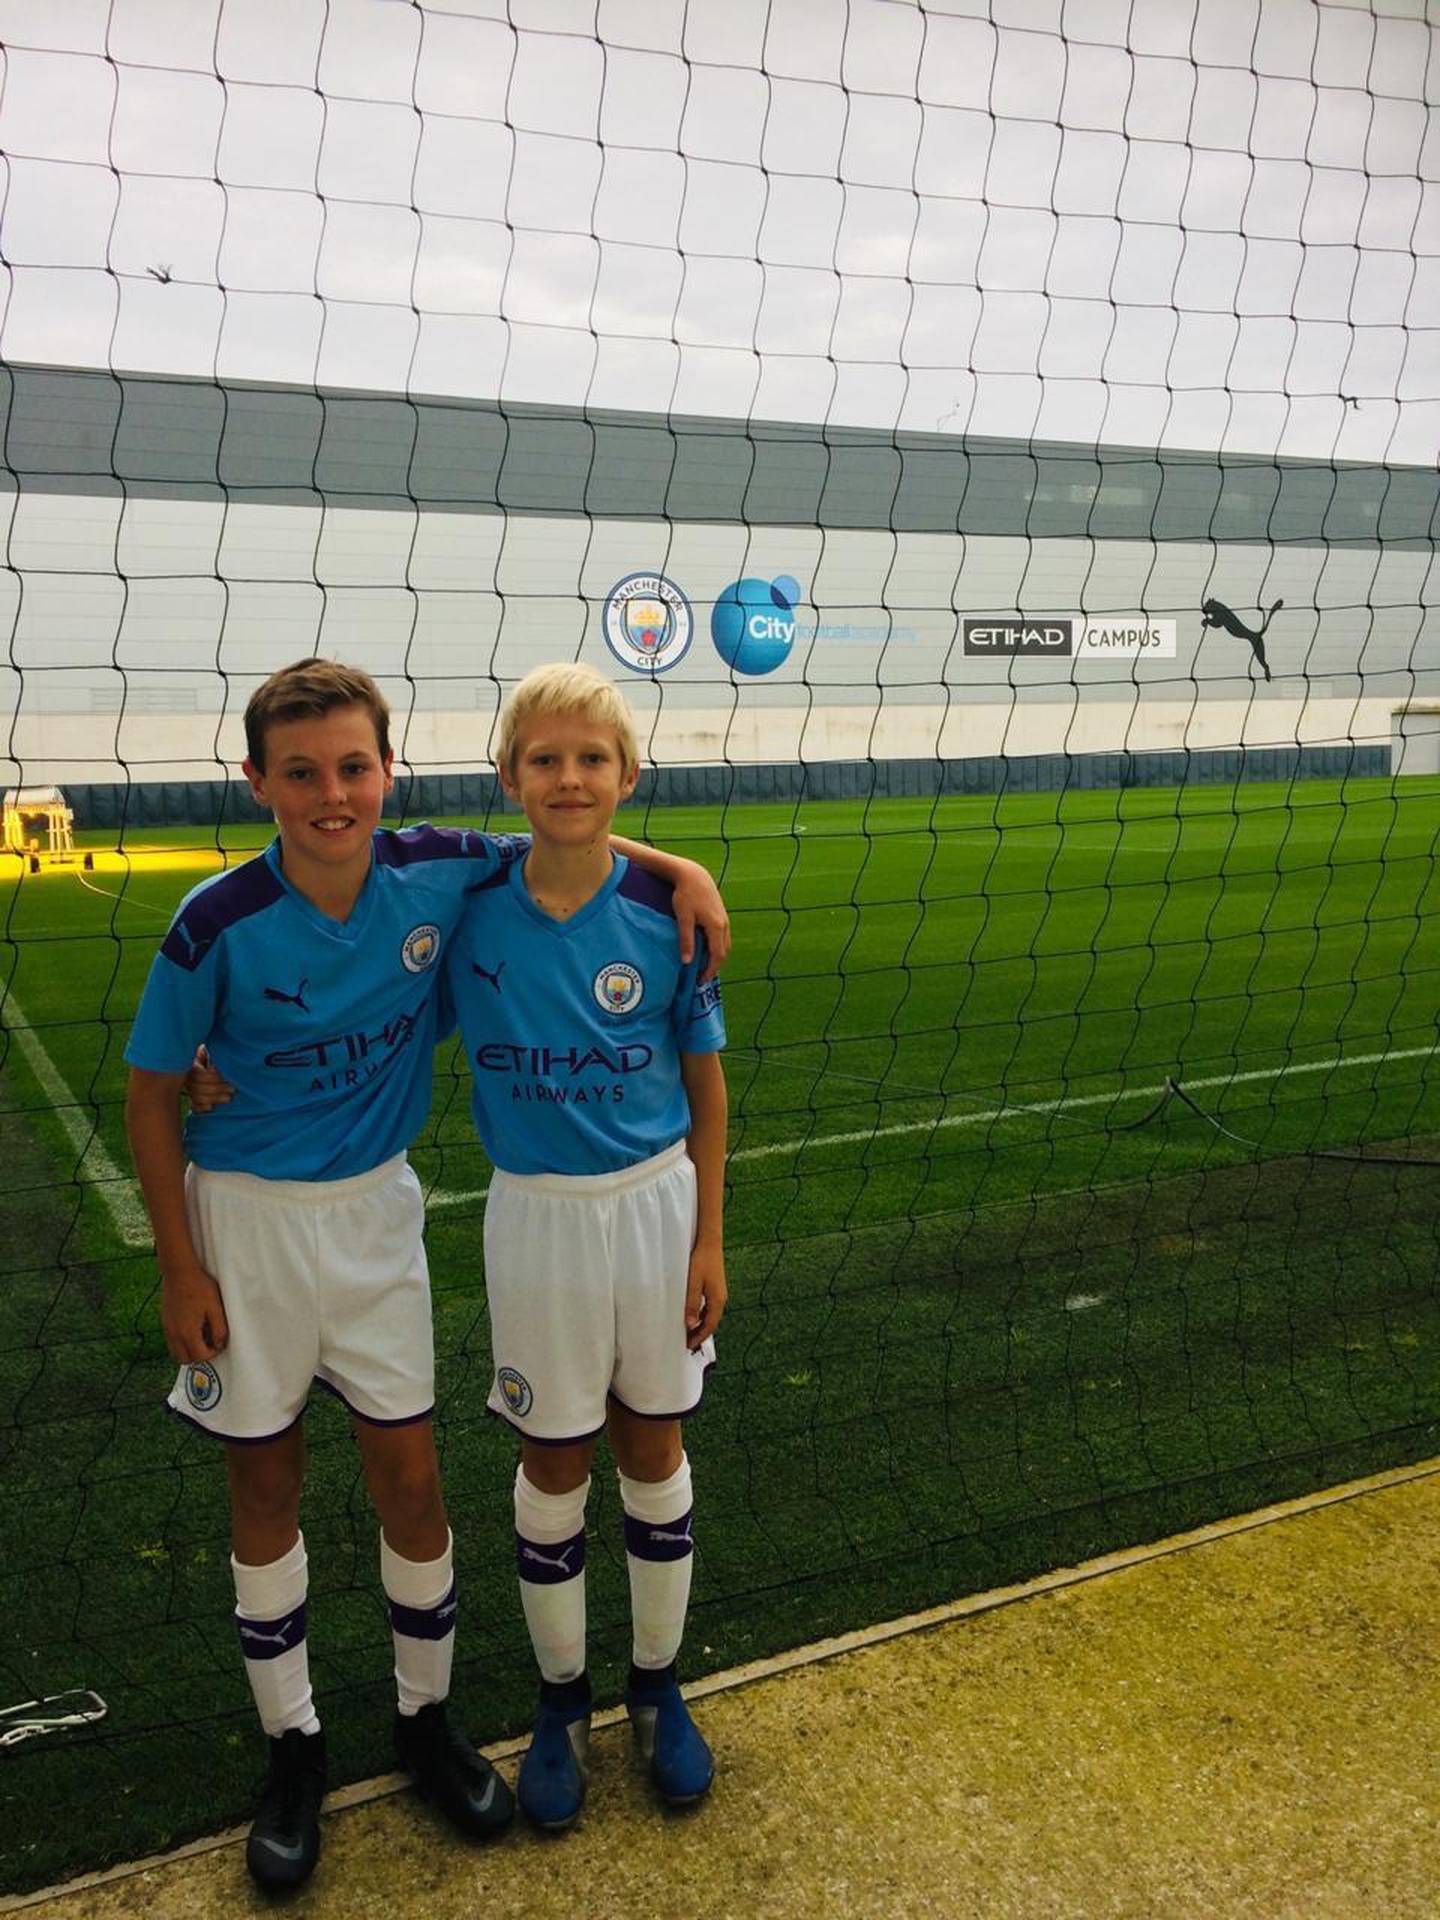 Thomas Nesbitt and Robert March receiving coaching at the top class facilities provided by Premier League winners, Manchester City. Courtesy City Football Schools